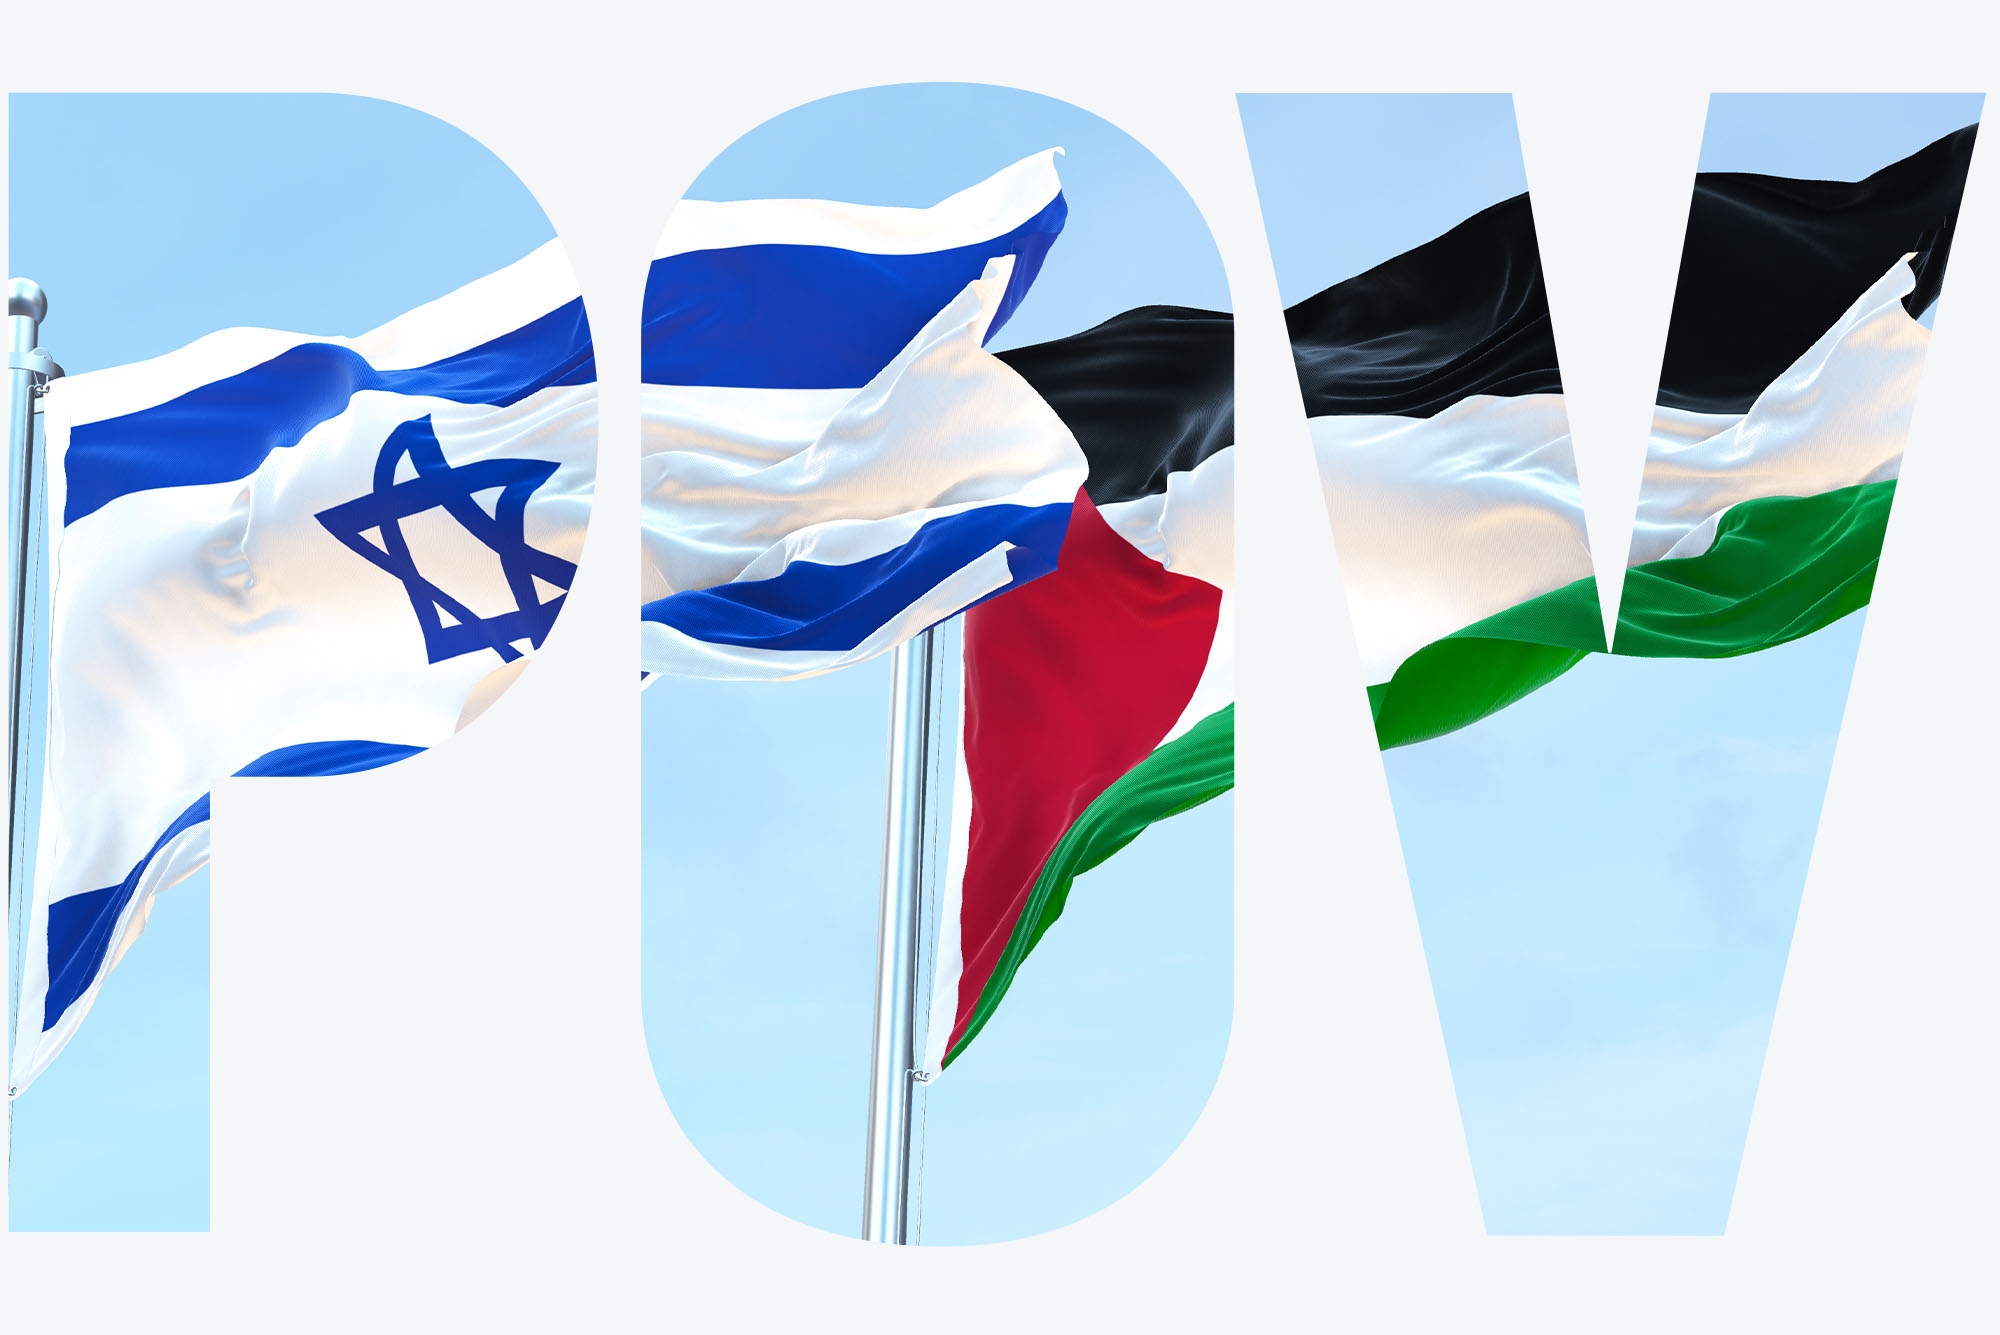 Photo: The Israel flag and Palestine flag both flying at the same height on a sunny day. Text overlay reads "POV"